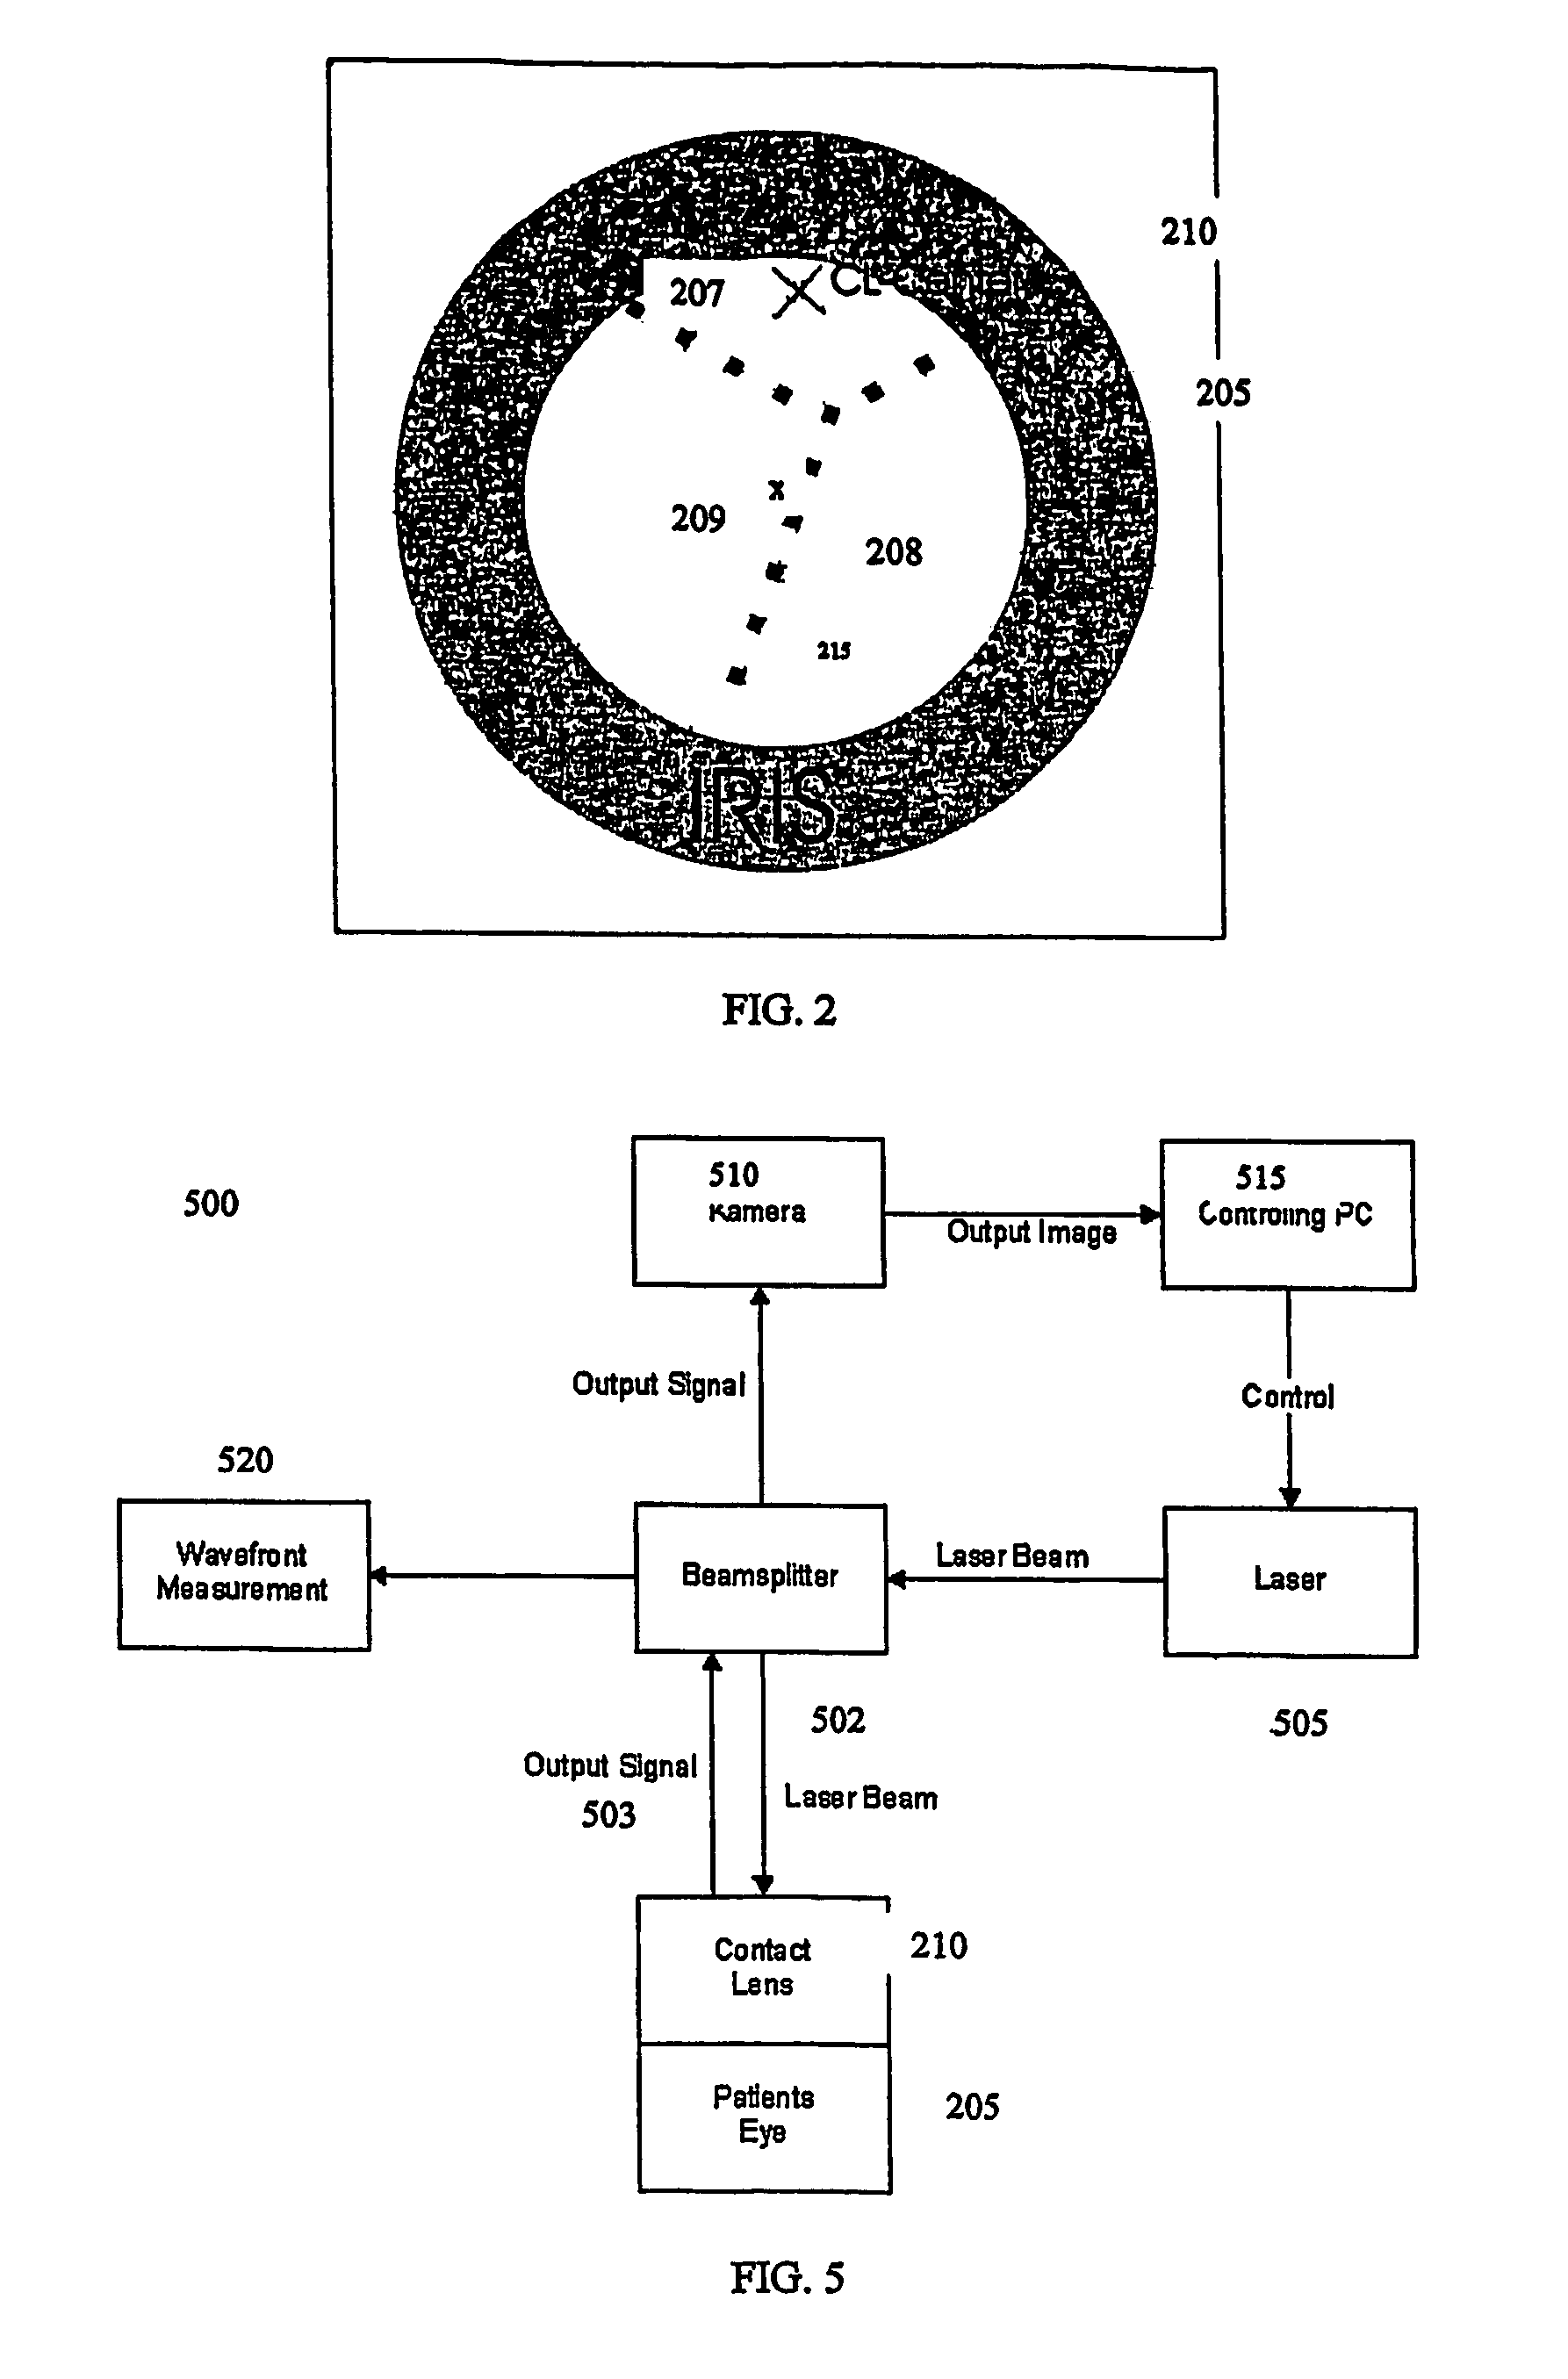 Method and apparatus for online contact lens evaluation